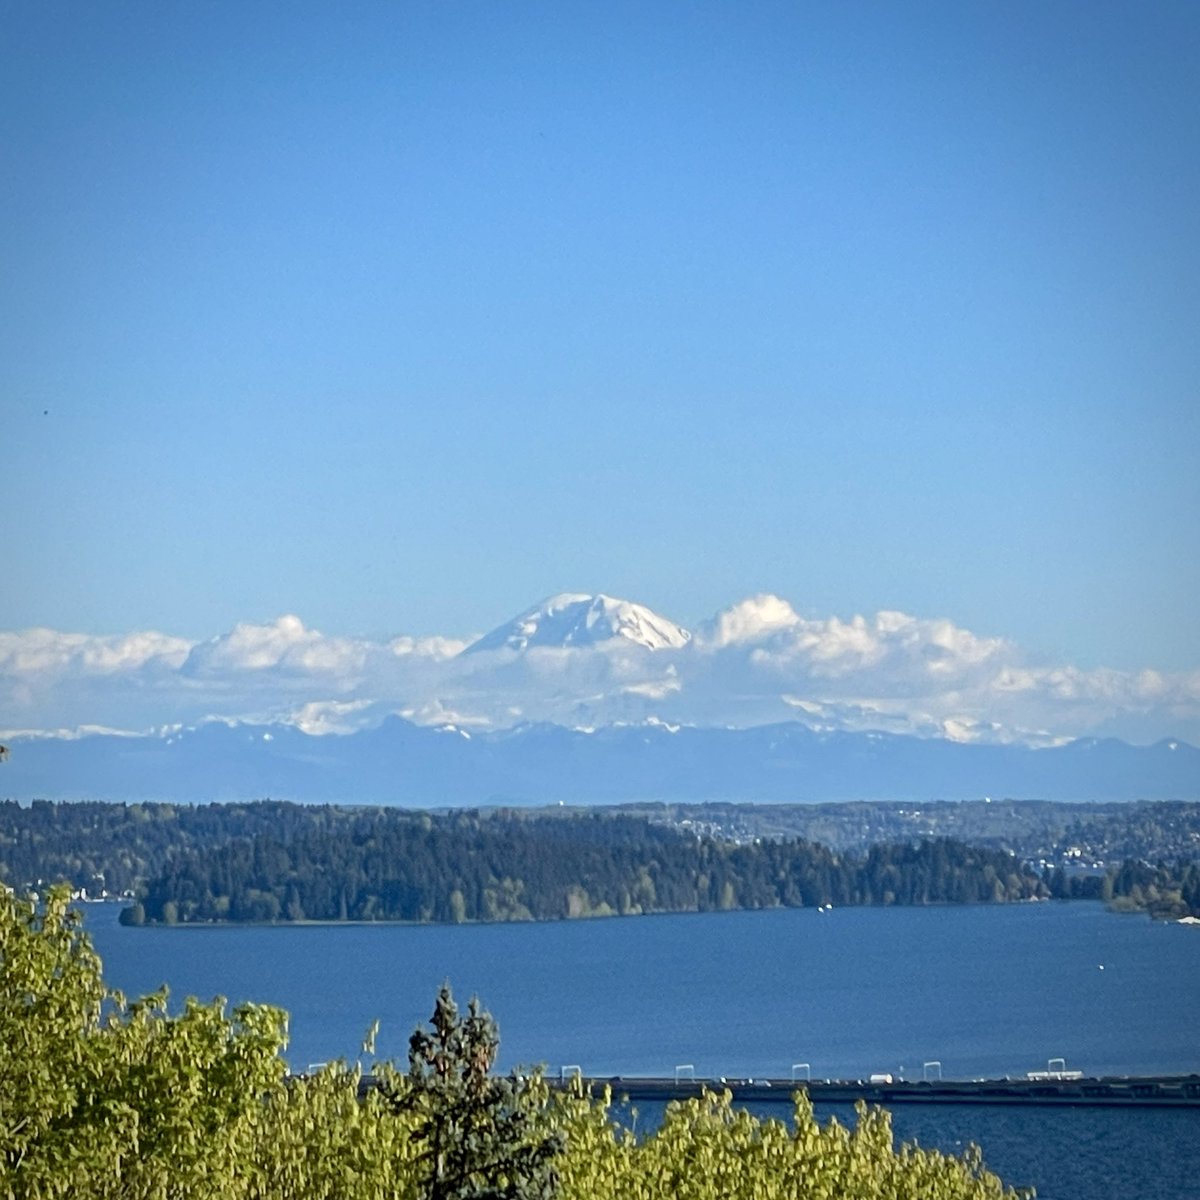 The mountain is making an appearance tonight after hiding all day. #wawx @MtRainierWatch